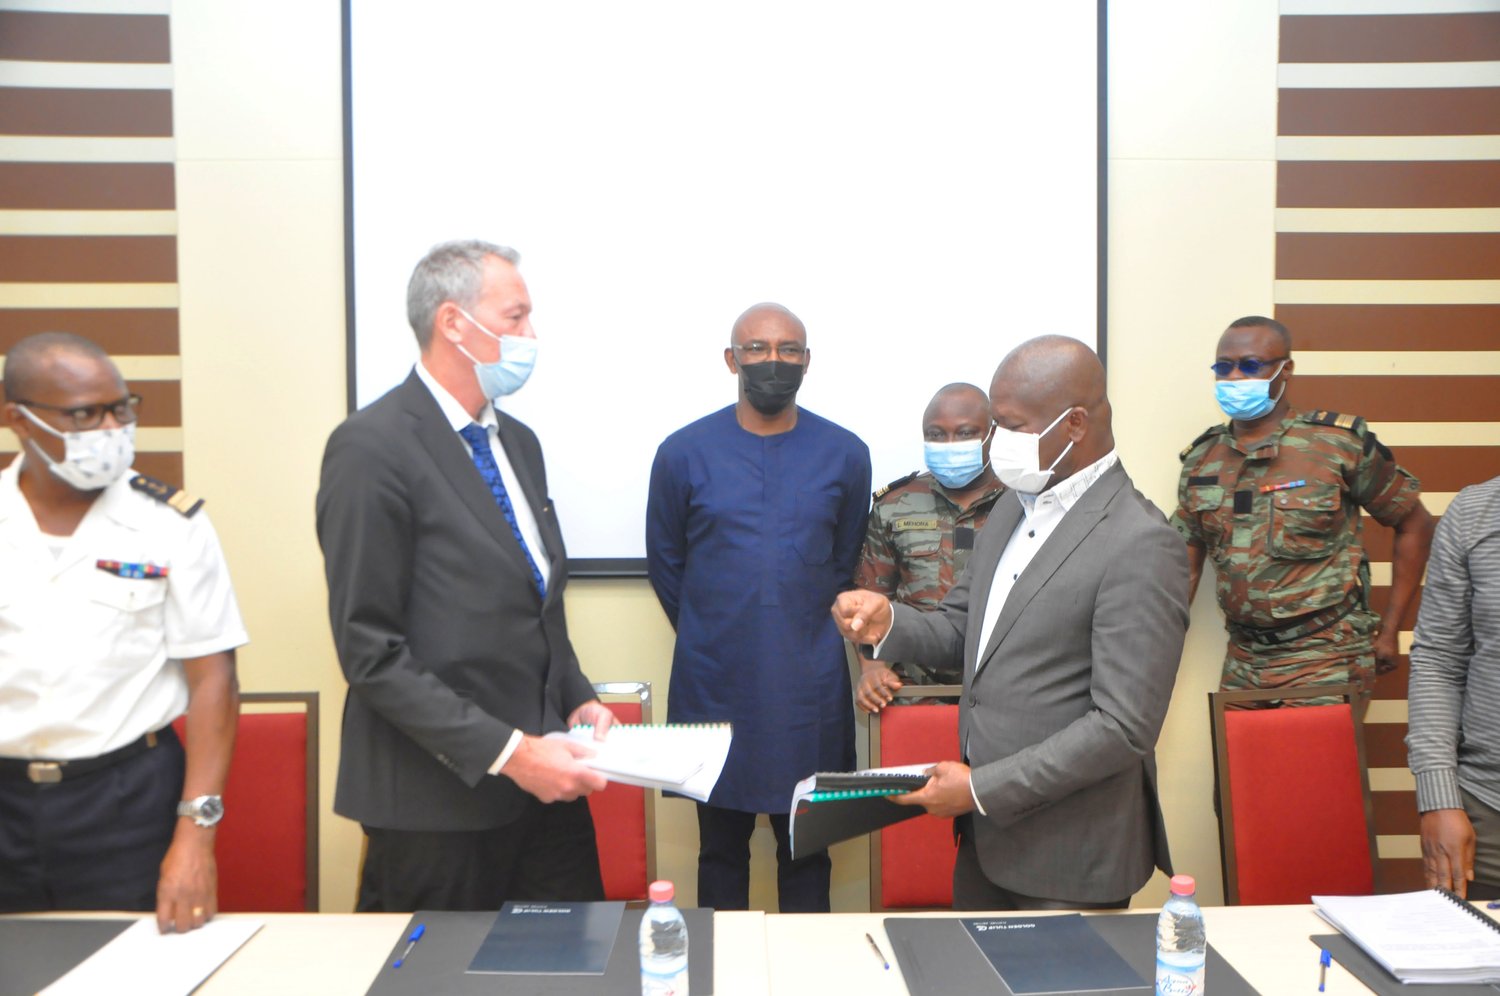 BENIN SIGNS CONTRACT TO DIGITIZE AND SAFEGUARD ITS COASTLINE